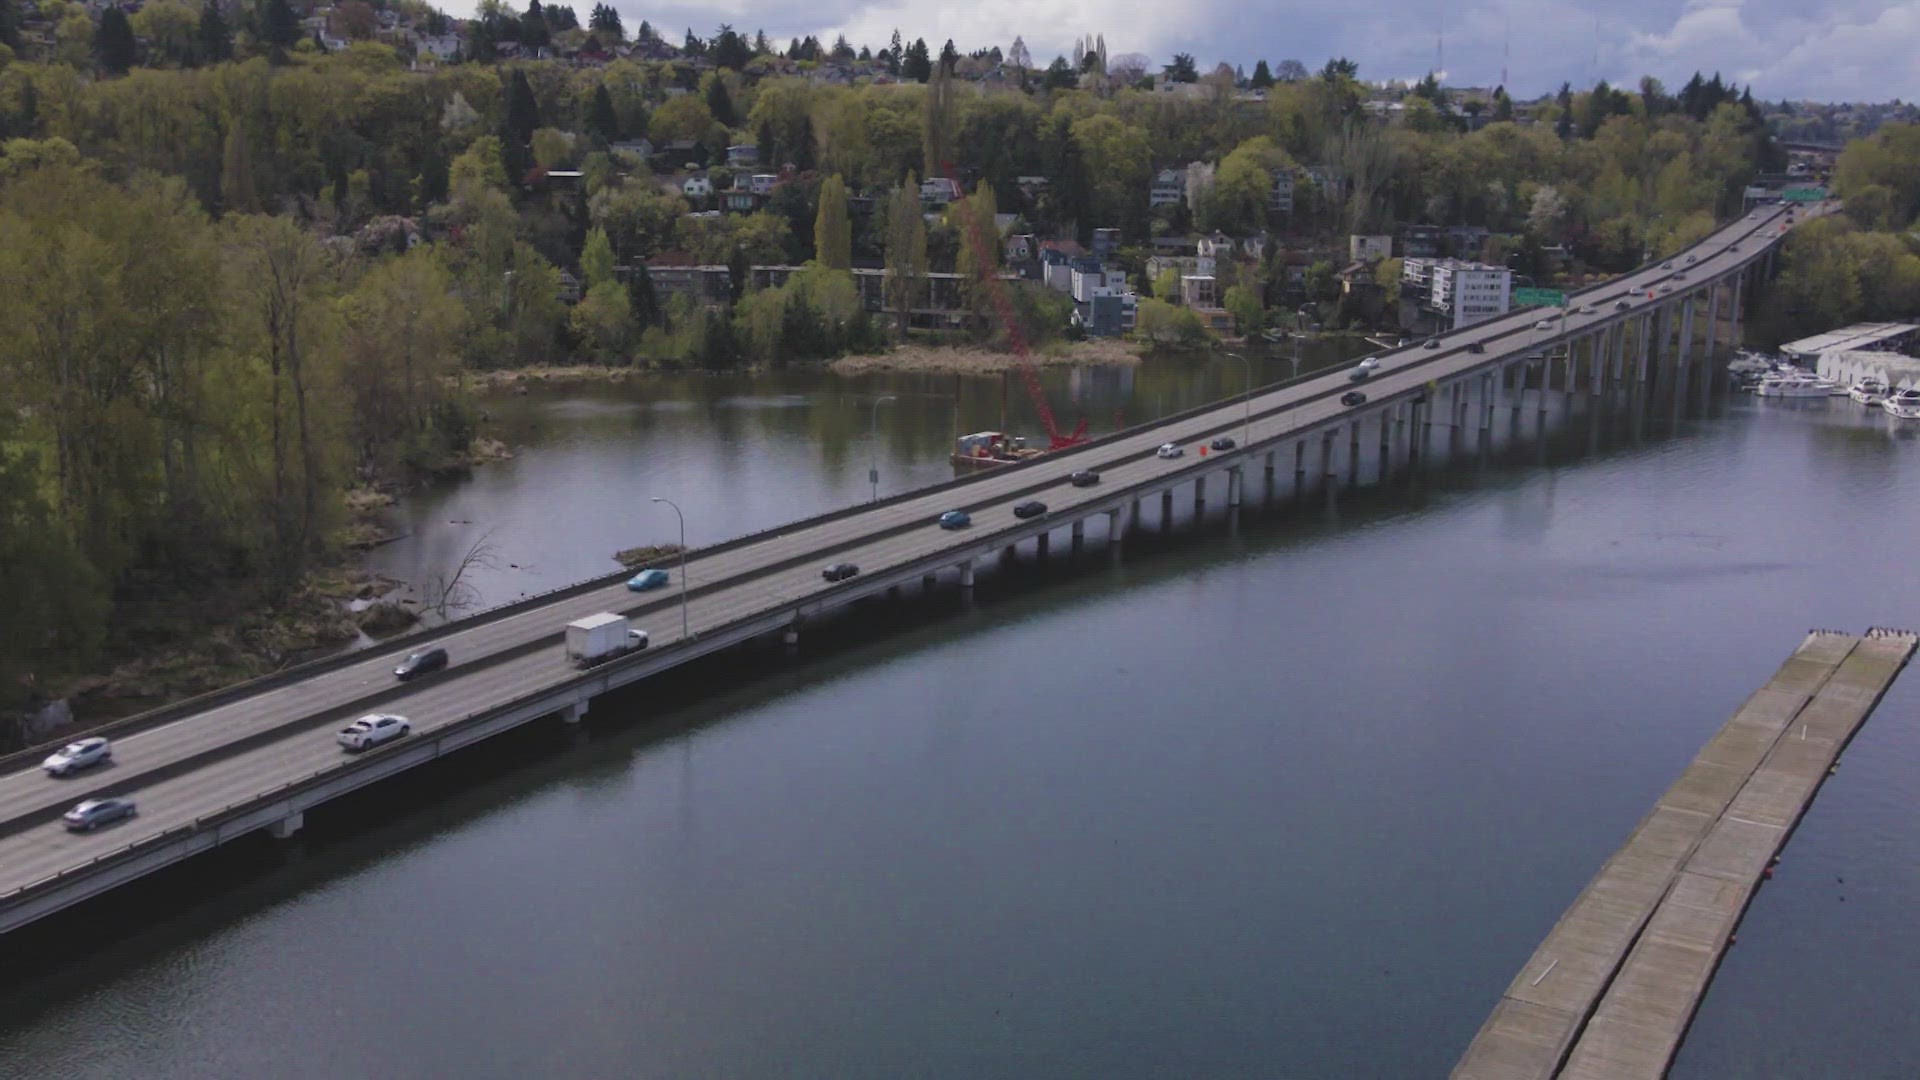 The bridge is the last stretch of state Route 520 that connects Montlake to I-5 over the bay.